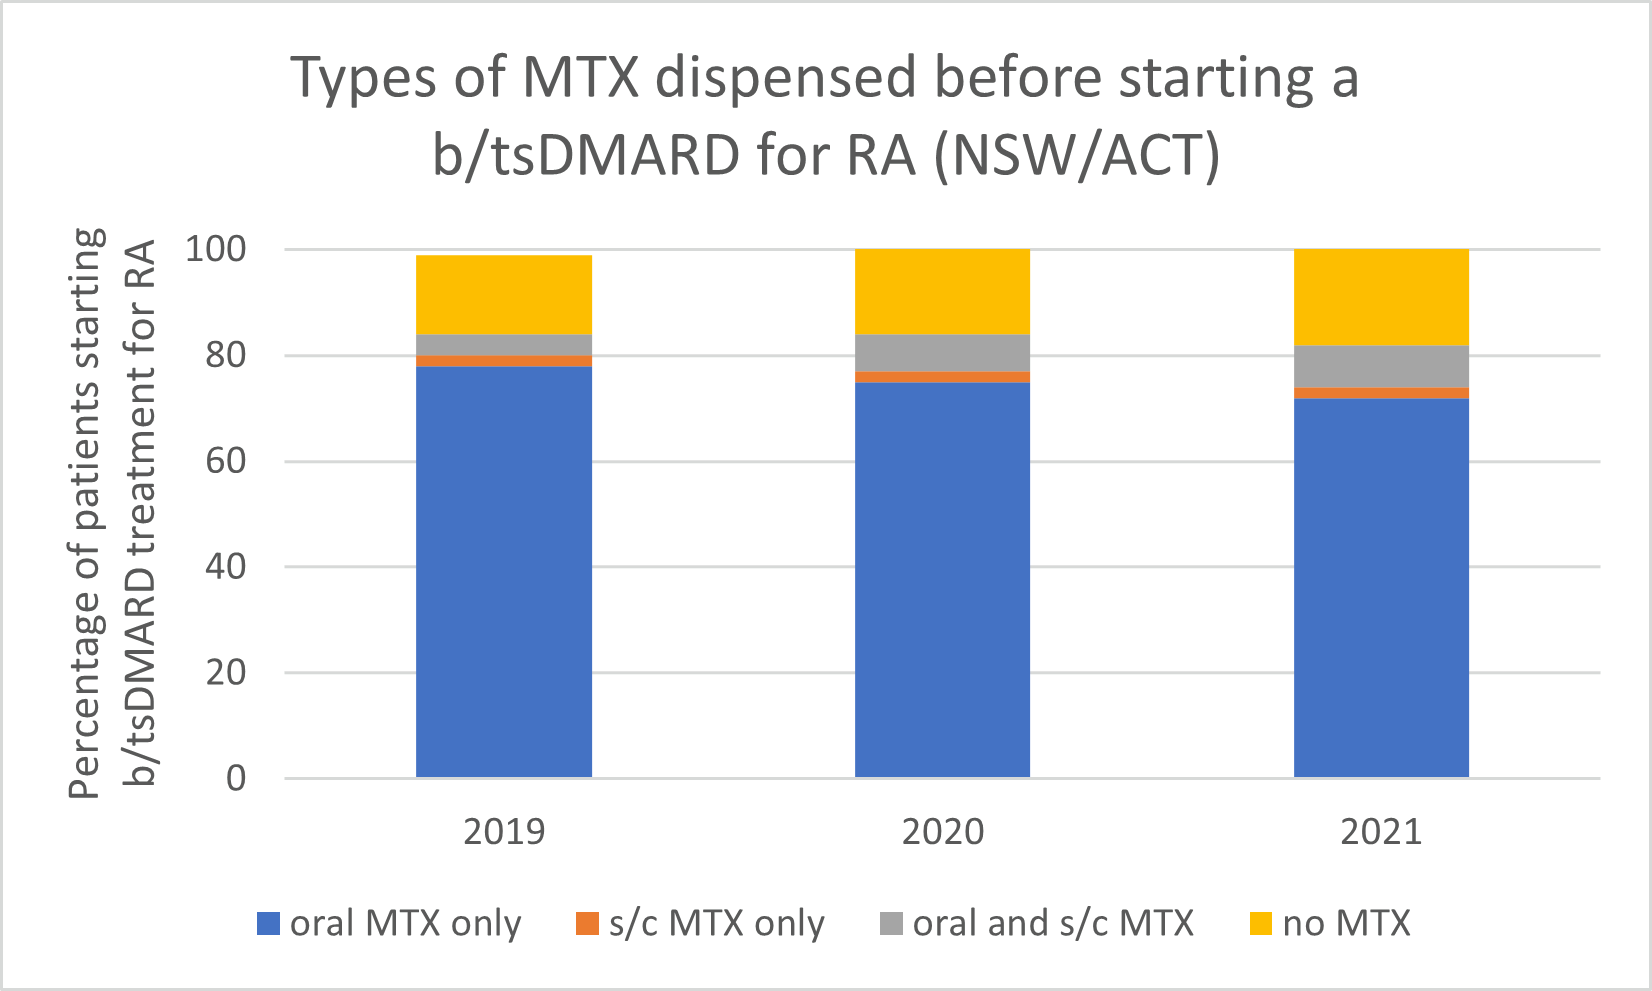 Types of methotrexate used before starting a b/tsDMARD for RA, 2019–2021 (NSW/ACT)